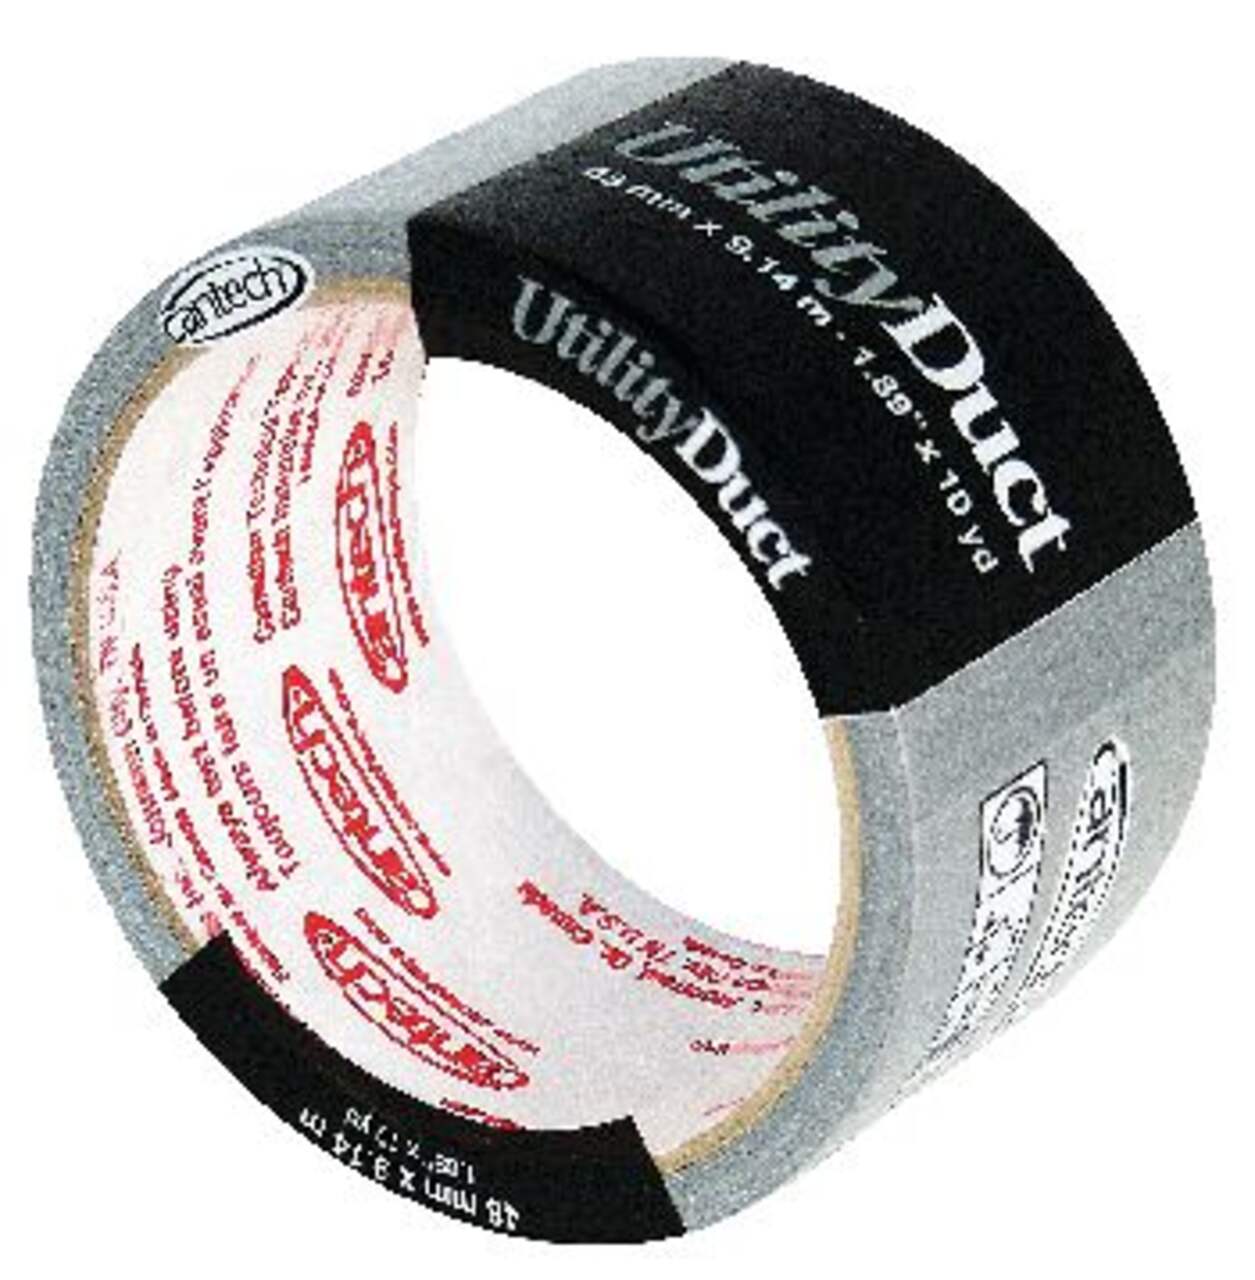 Cantech Multi-Purpose Utility Duct Tape High-Strength Adhesive